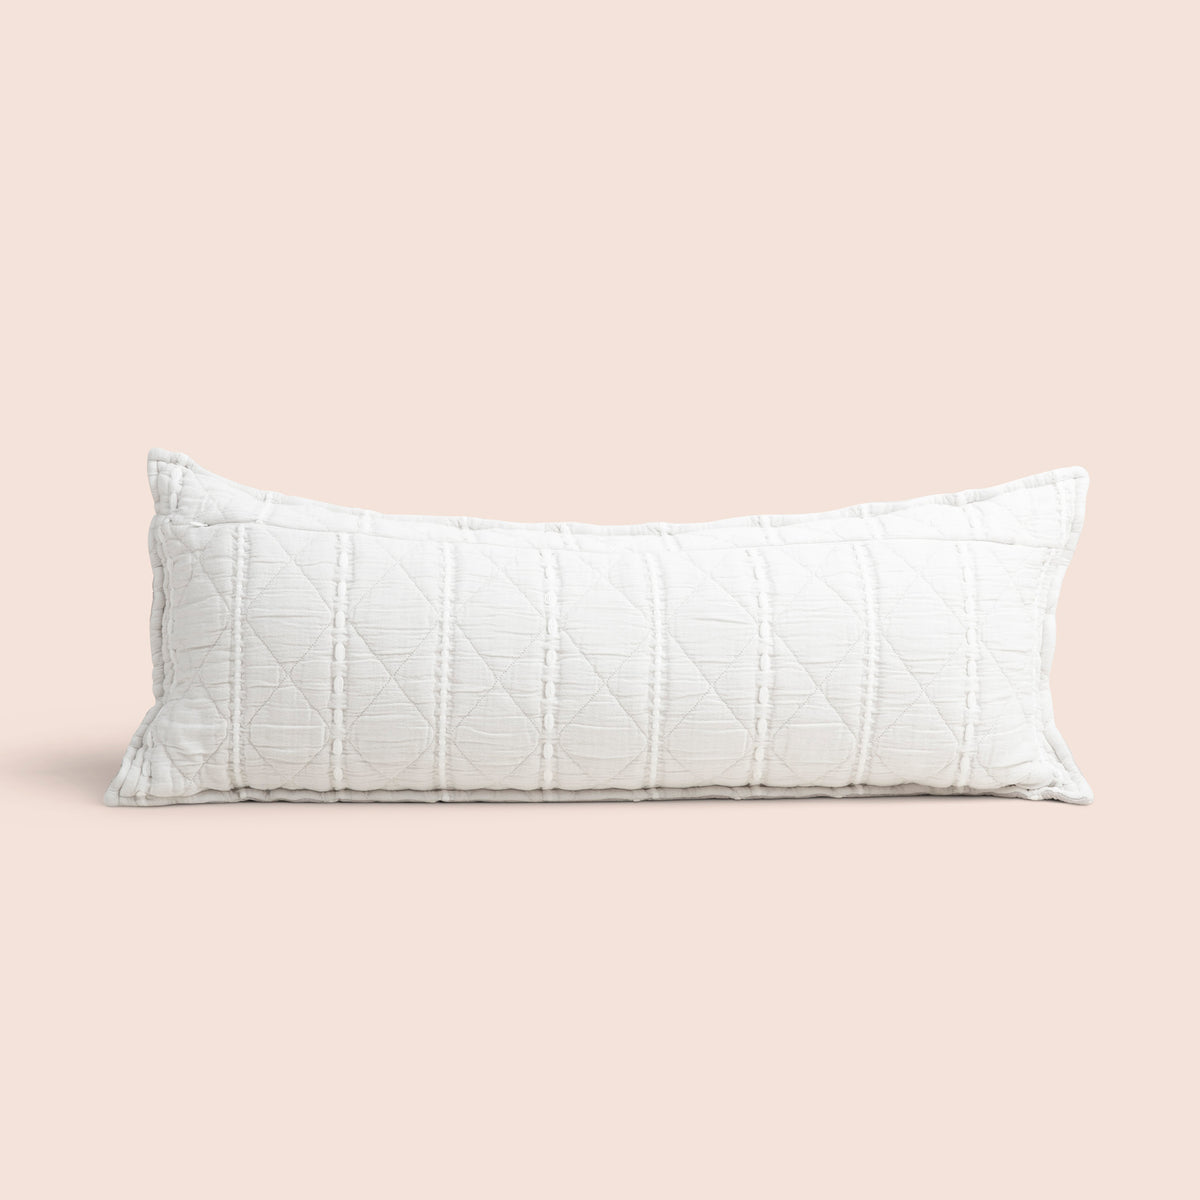 Image of the all-white reversible side of the Heritage Lumbar Pillow Cover on a lumbar pillow with a light pink background